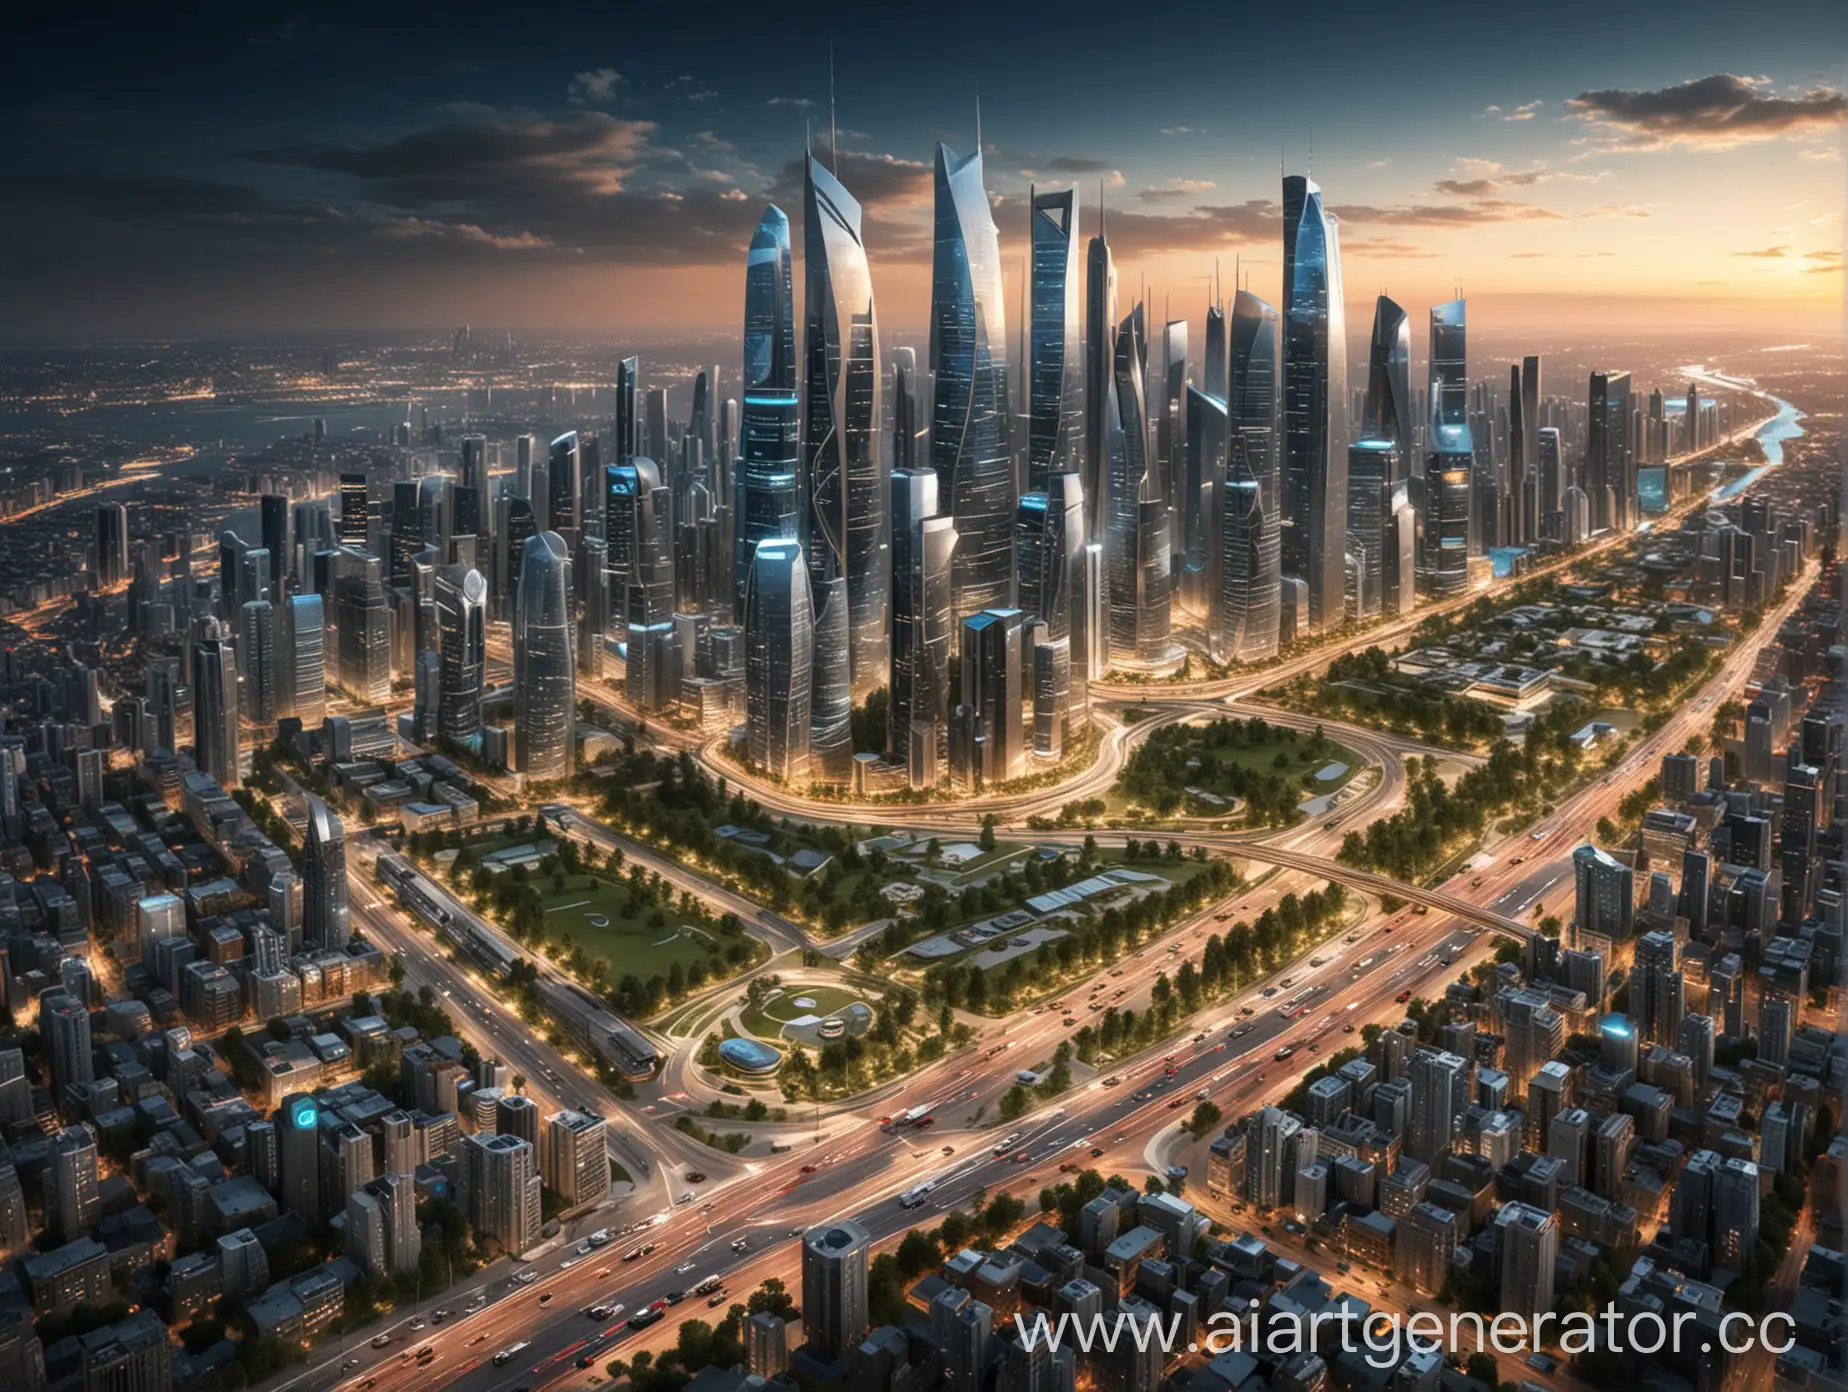 Futuristic-Smart-City-Concept-with-Advanced-Technology-and-Green-Spaces